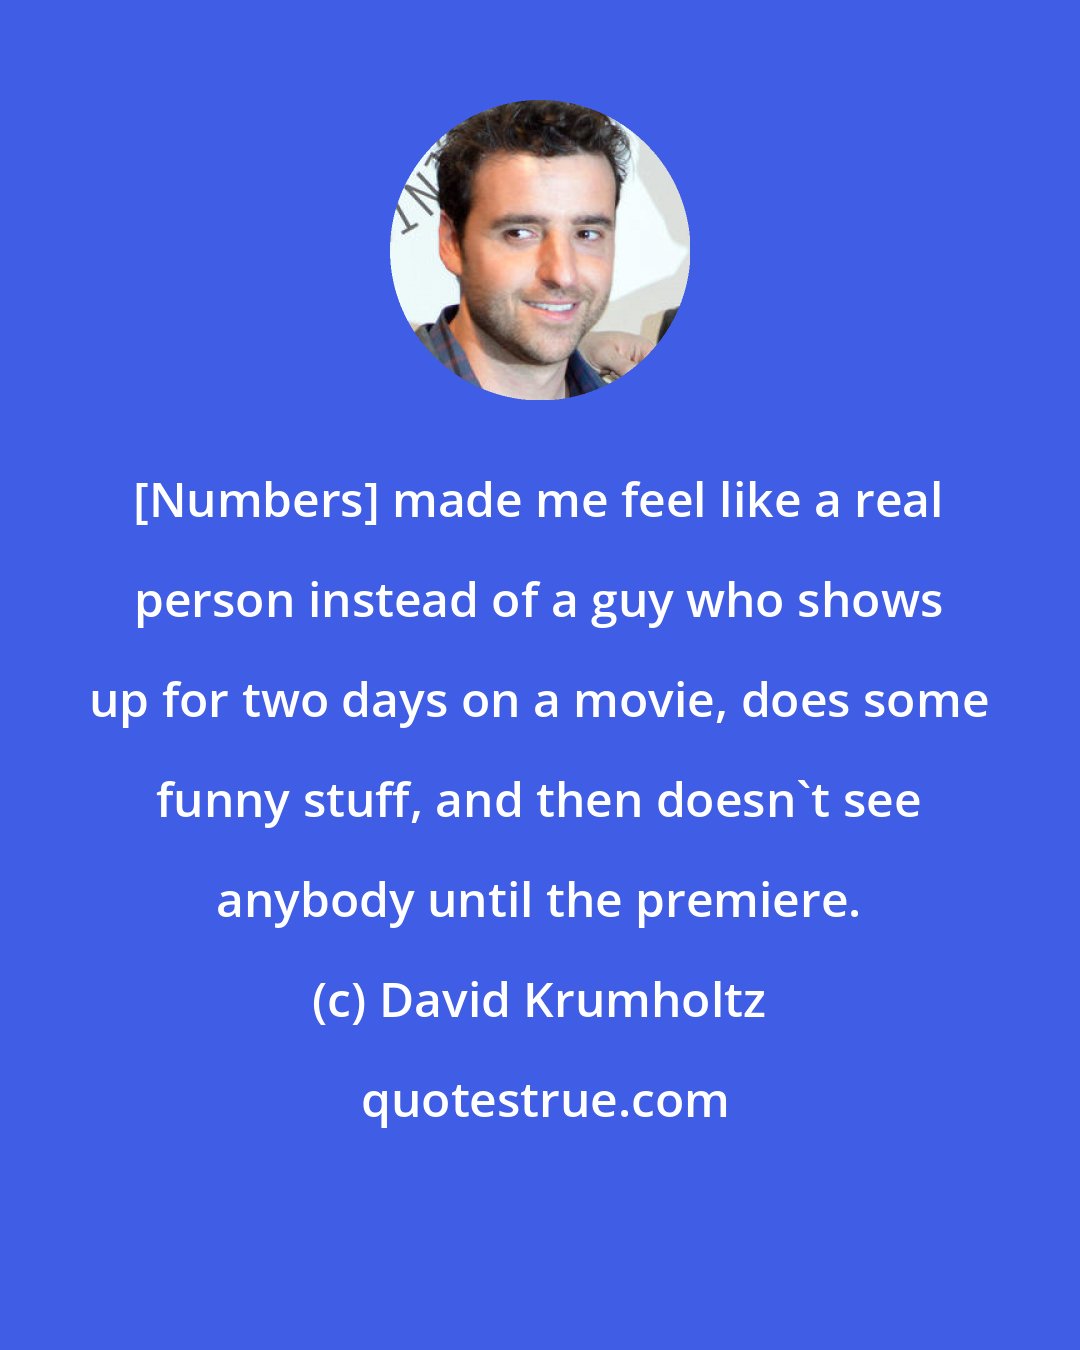 David Krumholtz: [Numbers] made me feel like a real person instead of a guy who shows up for two days on a movie, does some funny stuff, and then doesn't see anybody until the premiere.